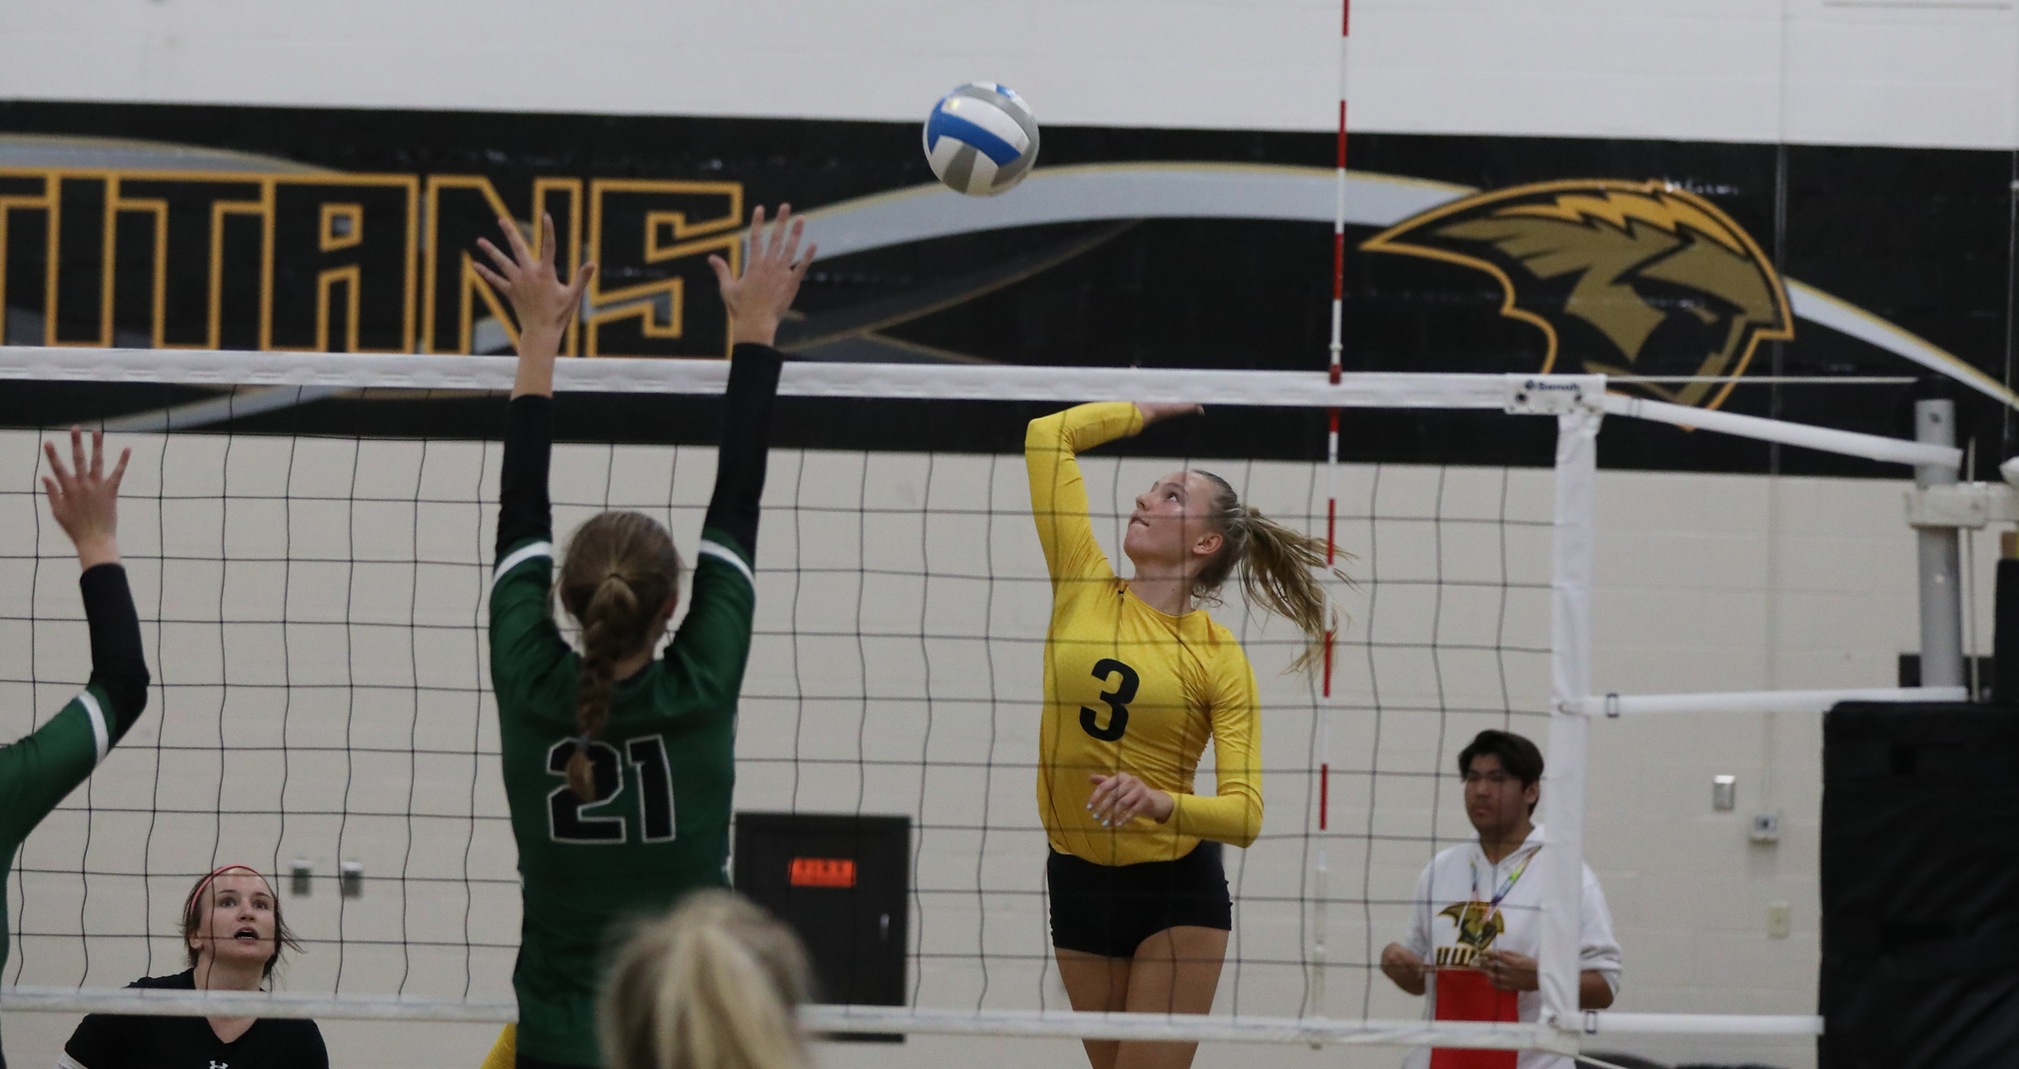 Carissa Sundholm had a pair of double-doubles with 11 kills and 10 digs against Loras College and 13 kills and 17 digs against Carroll University.